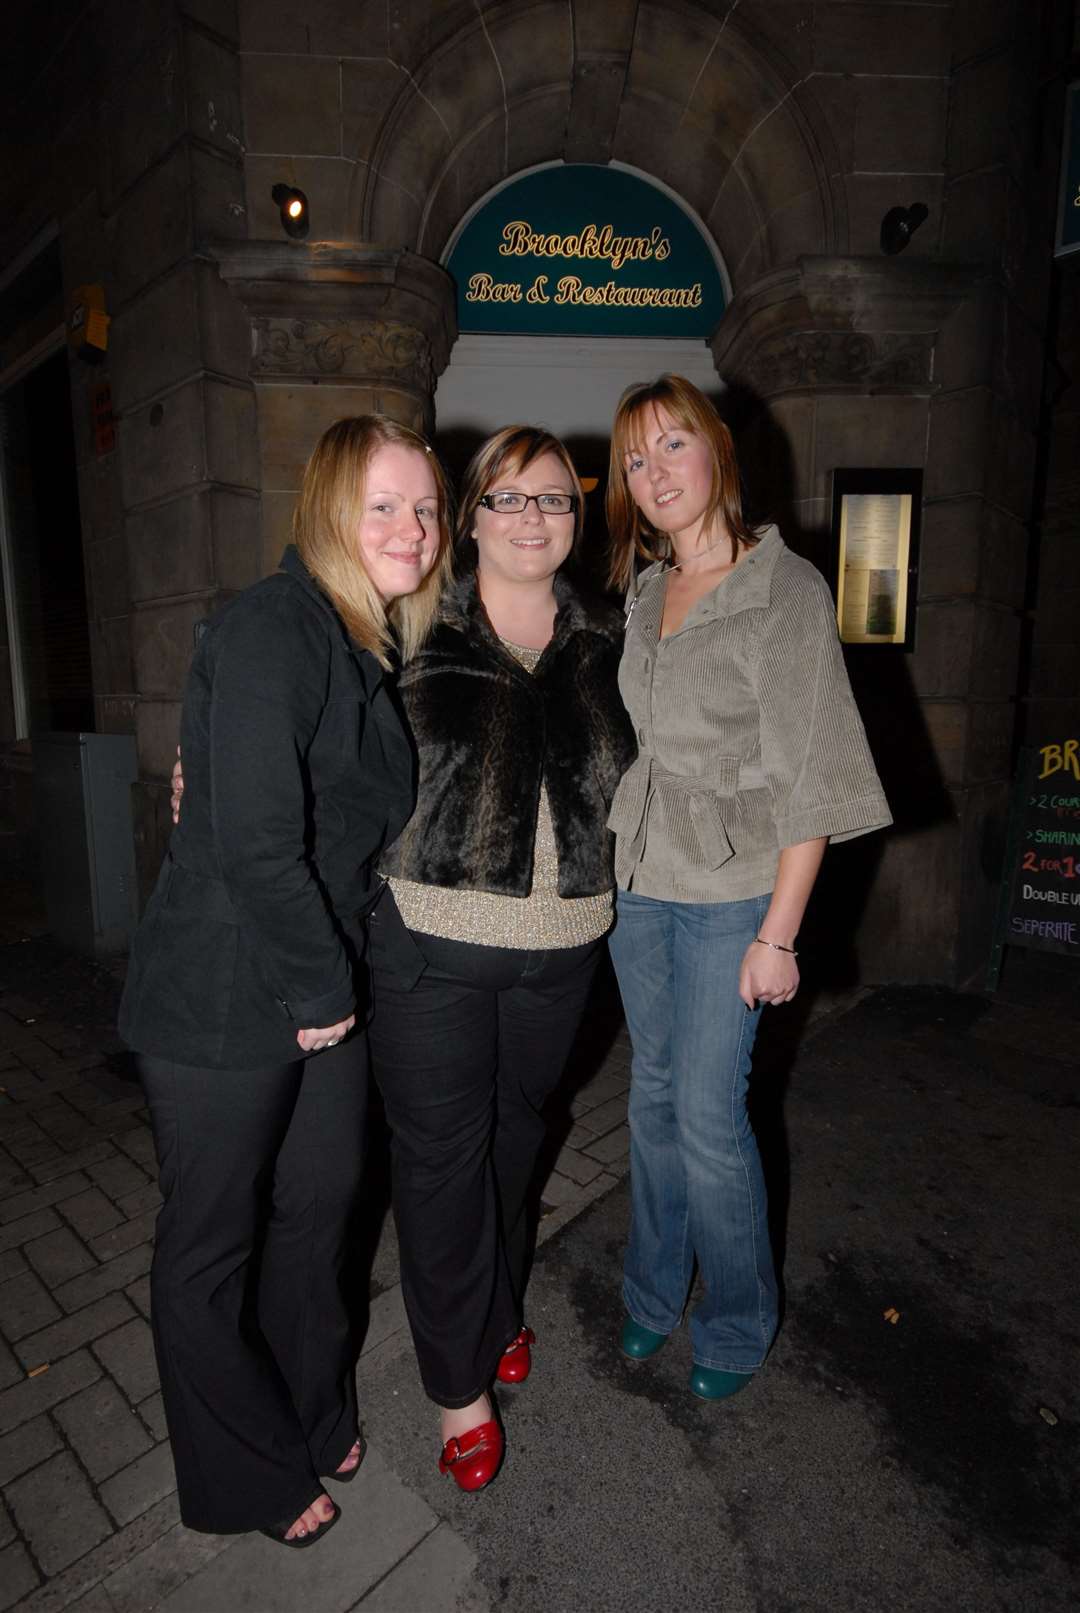 See: Copy By: .Cityseen night out at Brooklyns for (LtoR) Laura Goldie,Gillian Davidson and Lynette Webster.Pic By Gary Anthony..SPP Staff.Photographer.